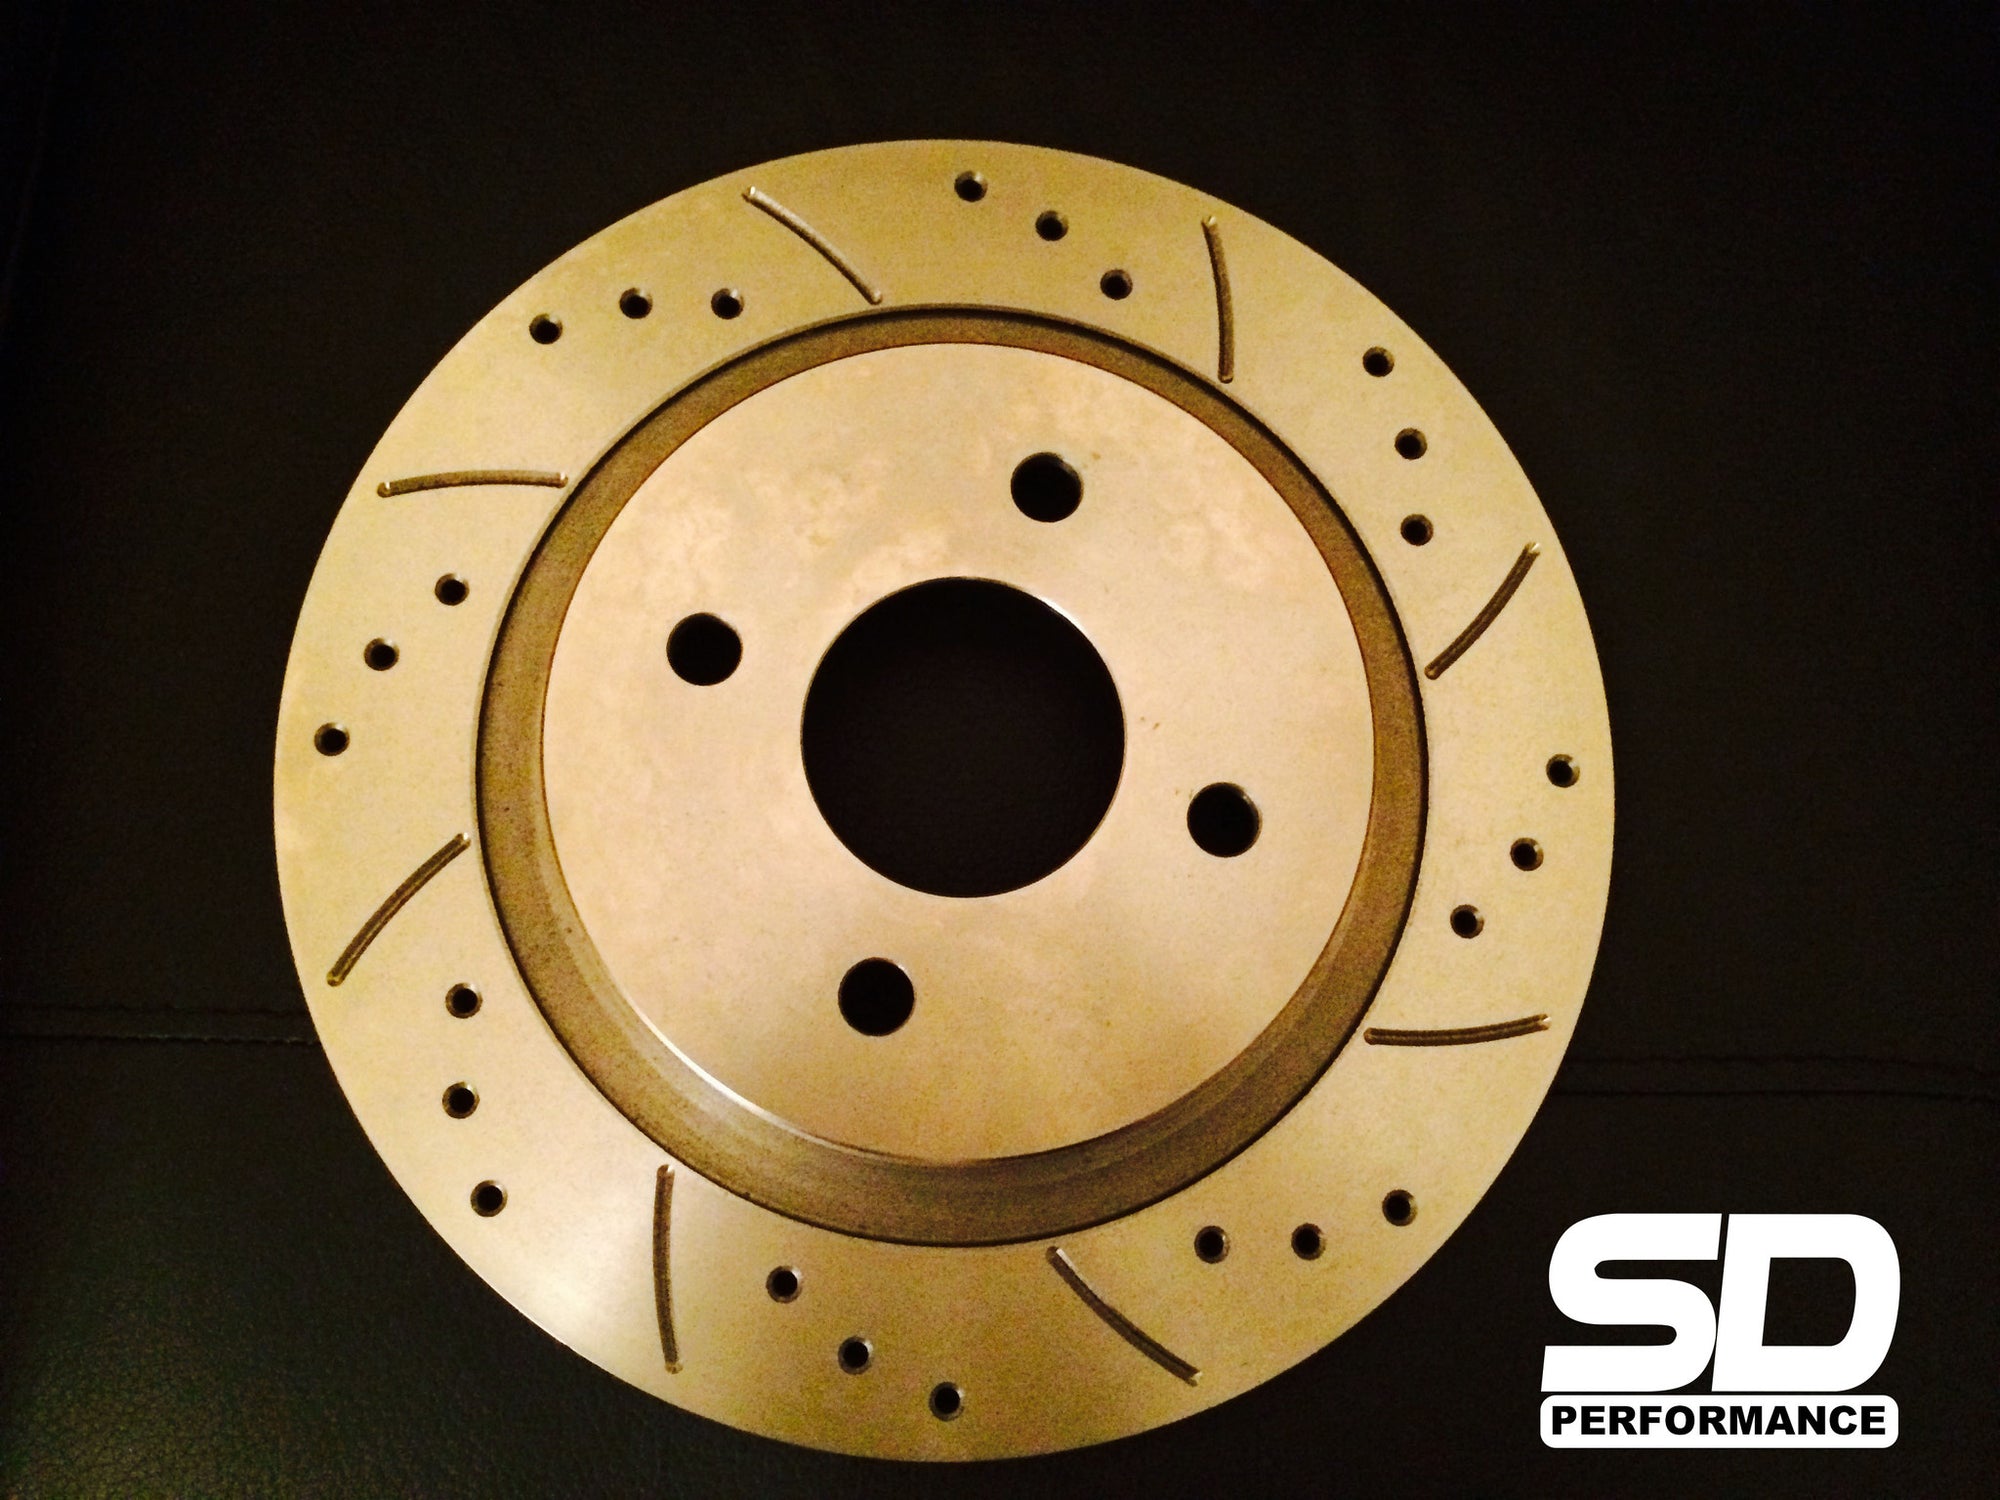 SD Performance Focus ST170 Performance rear discs - Drilled and Grooved